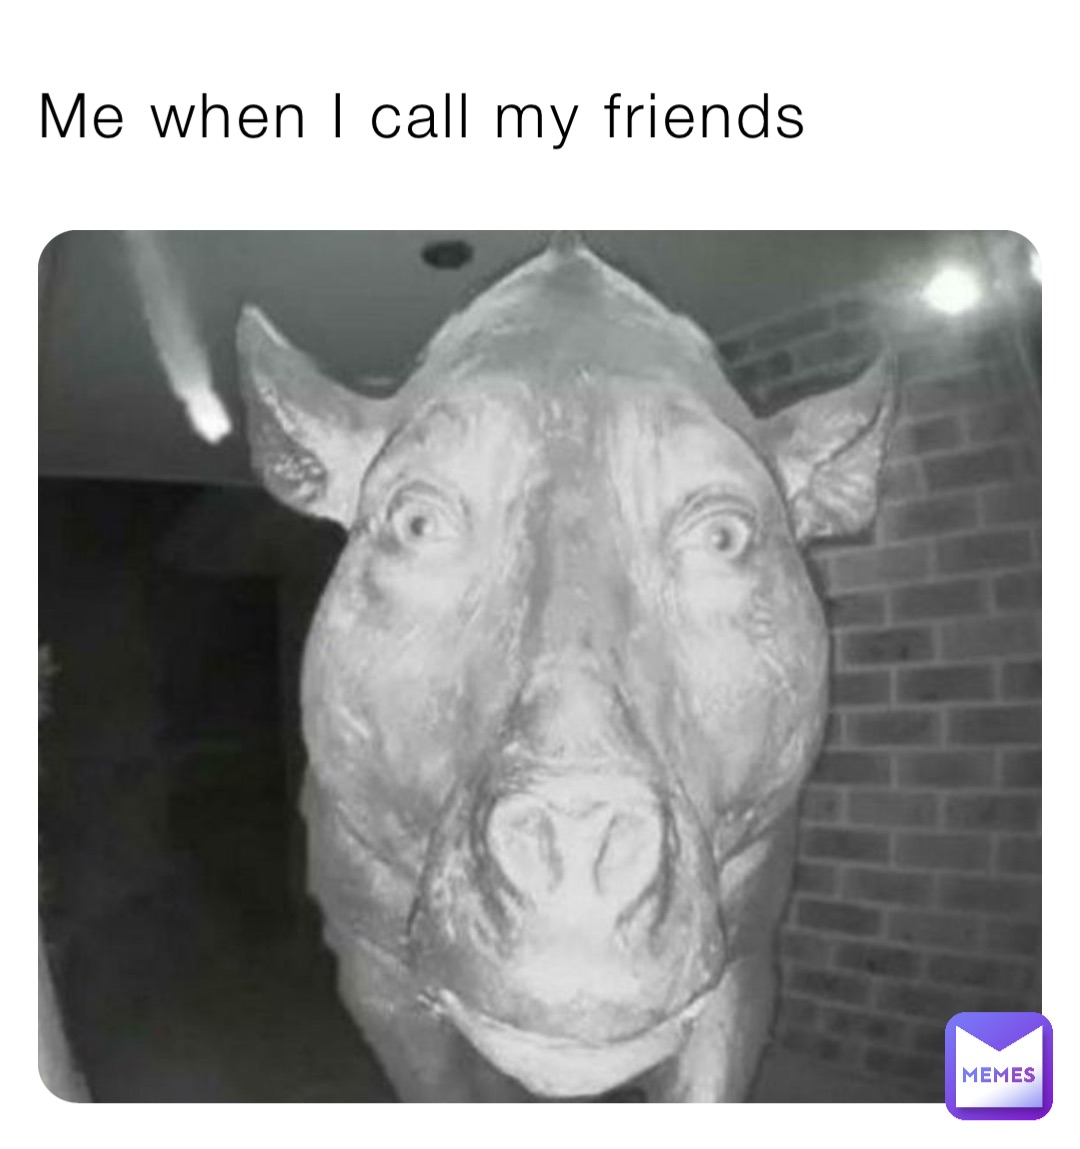 Me when I call my friends